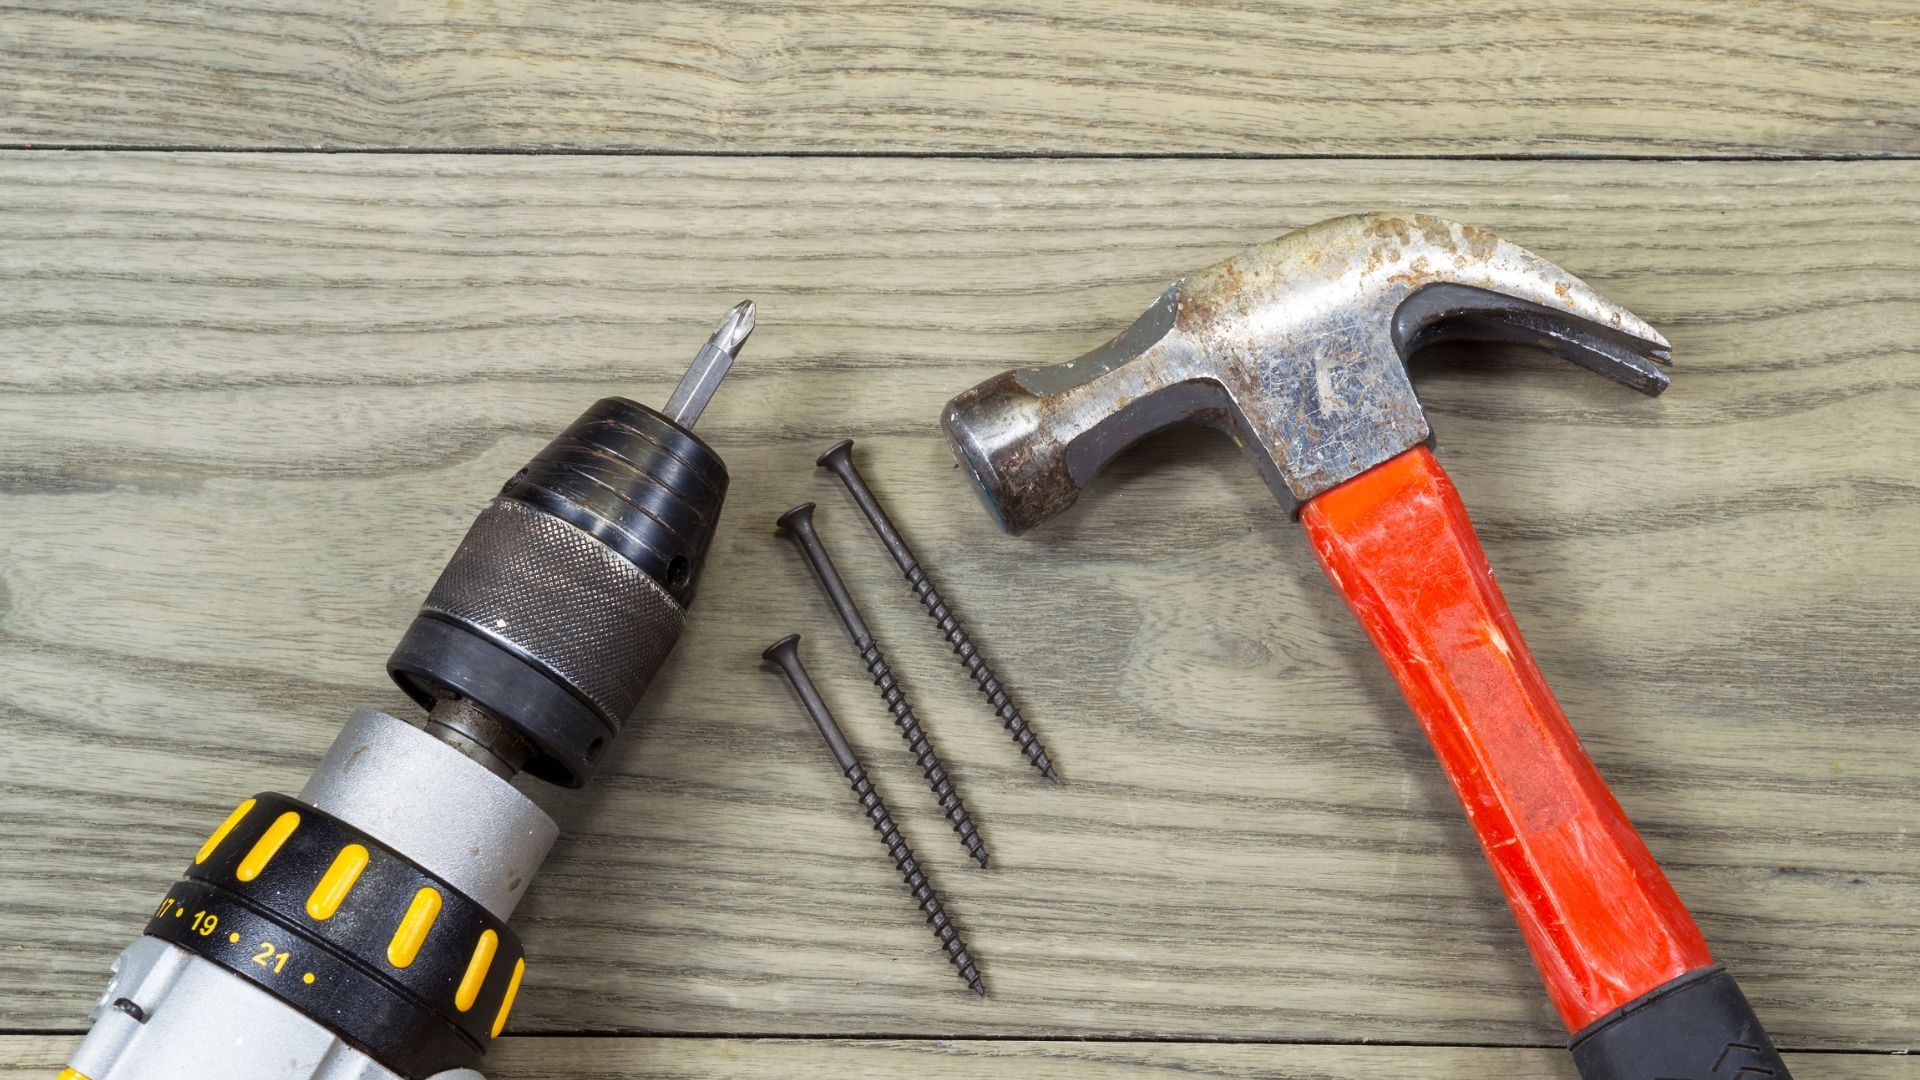 Tools for deck building: a drill, hammer, and nails on wood.